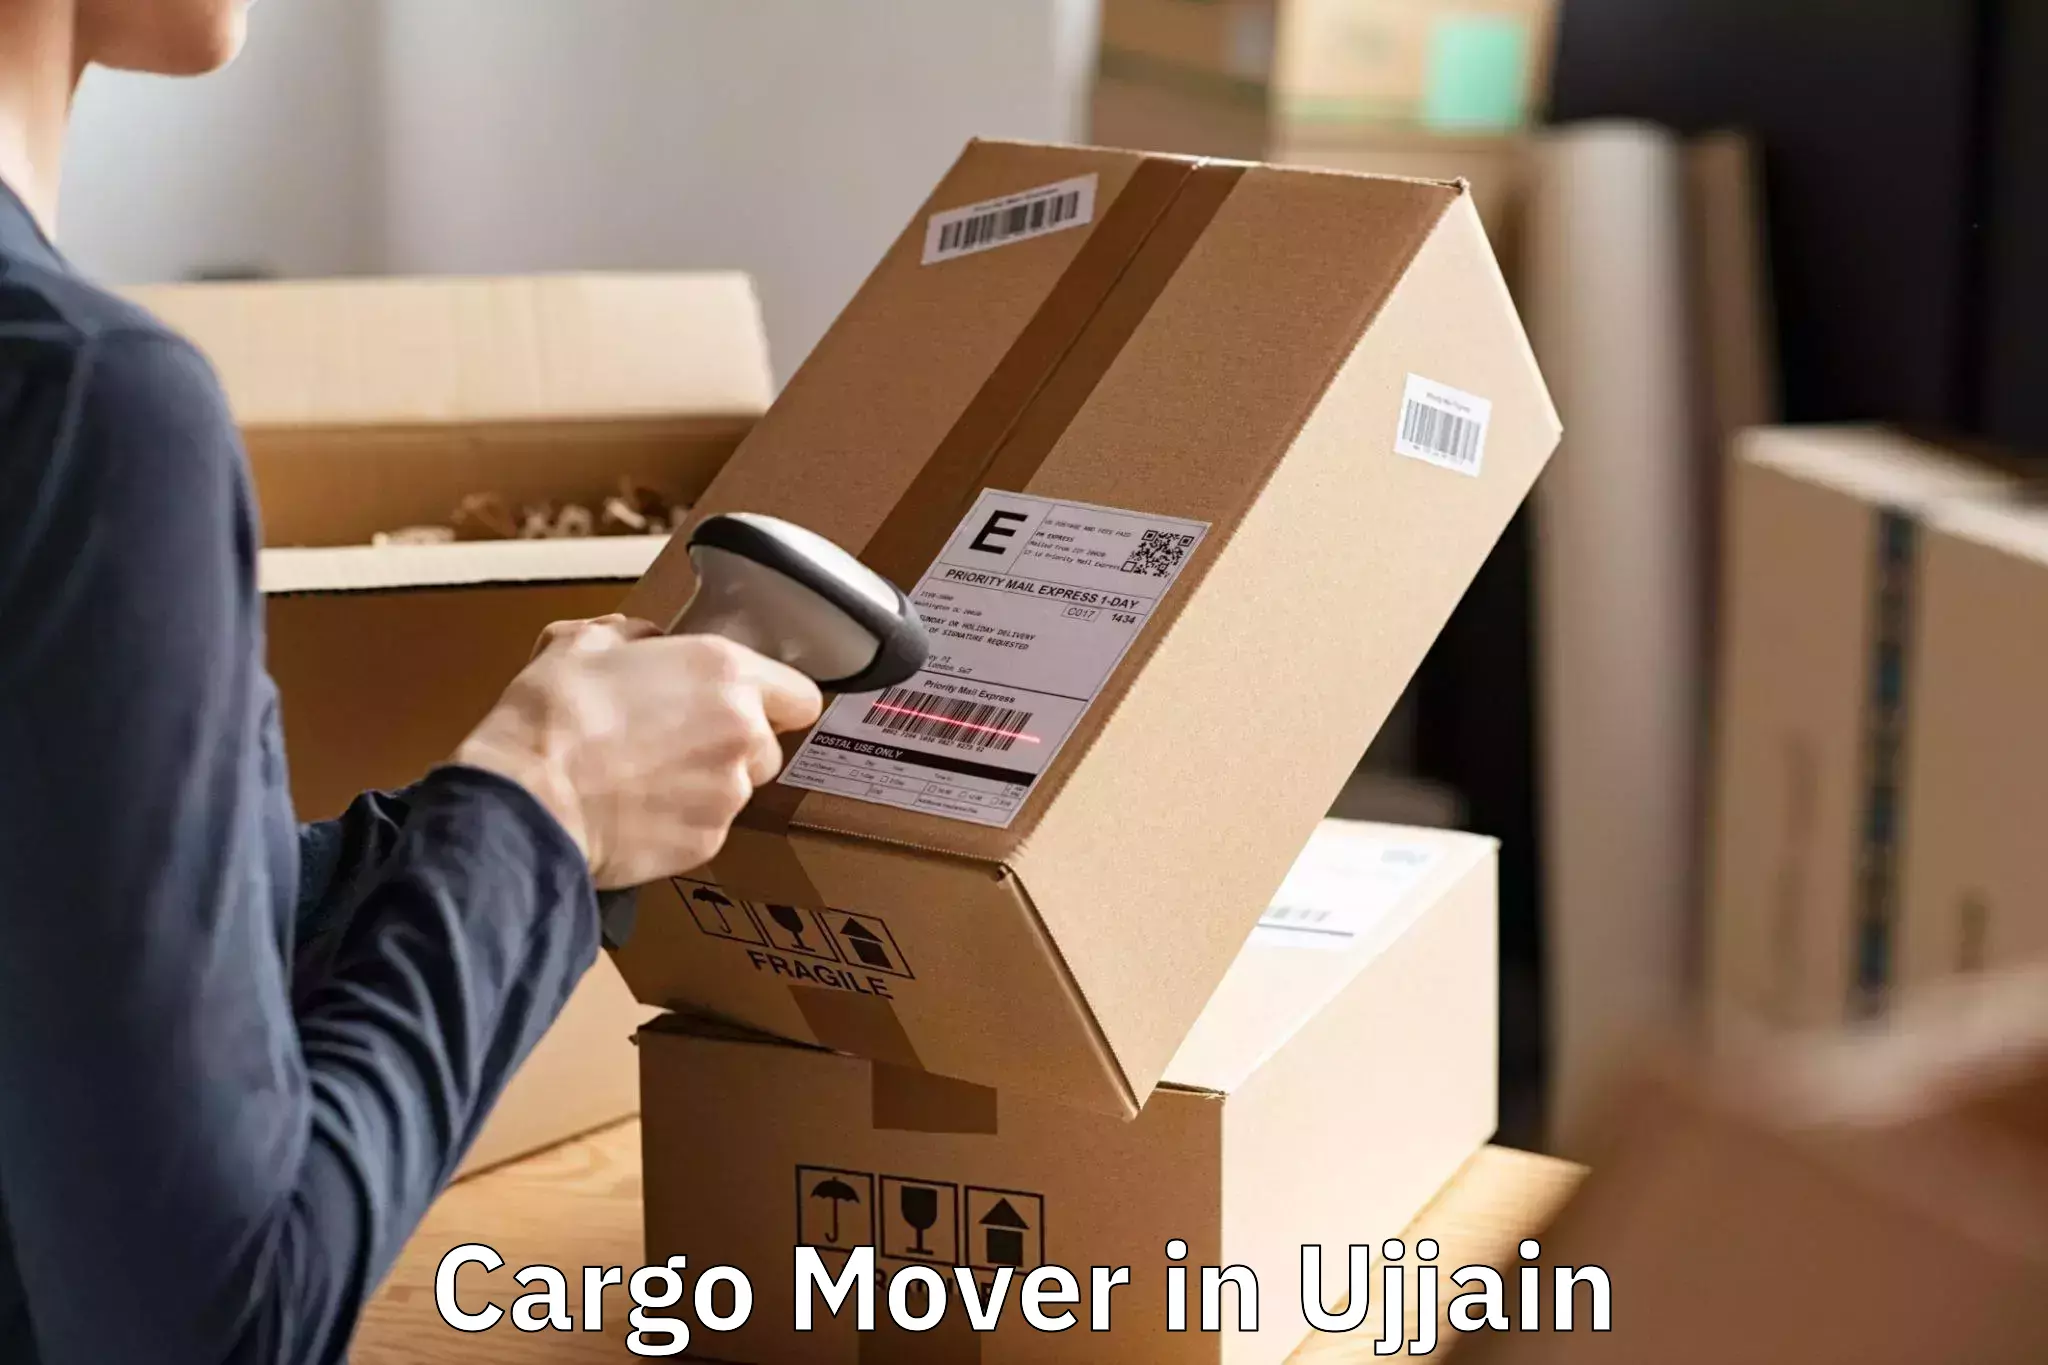 Reliable Cargo Mover Available in Ujjain, Madhya Pradesh (MP)